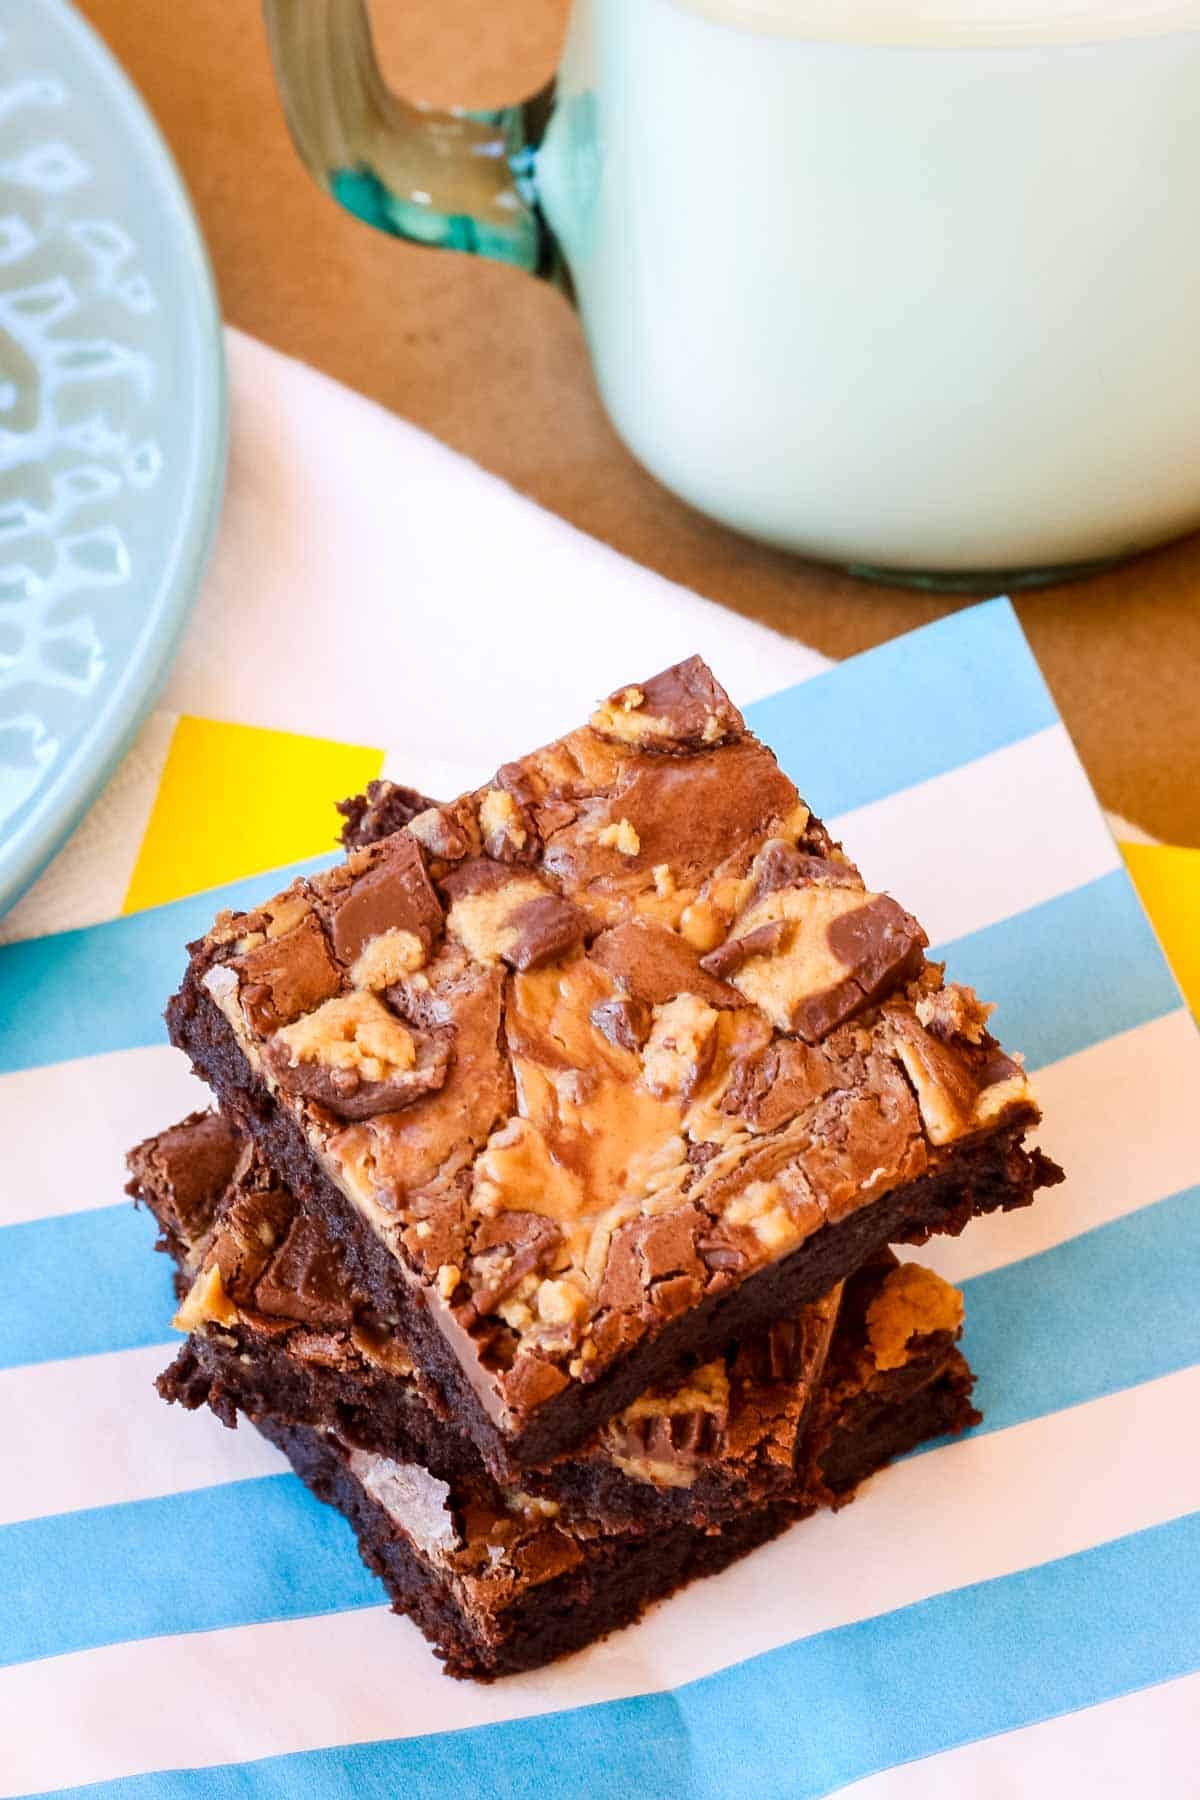 Three peanut butter brownies stacked on a blue and white striped napkin next to a glass of milk.